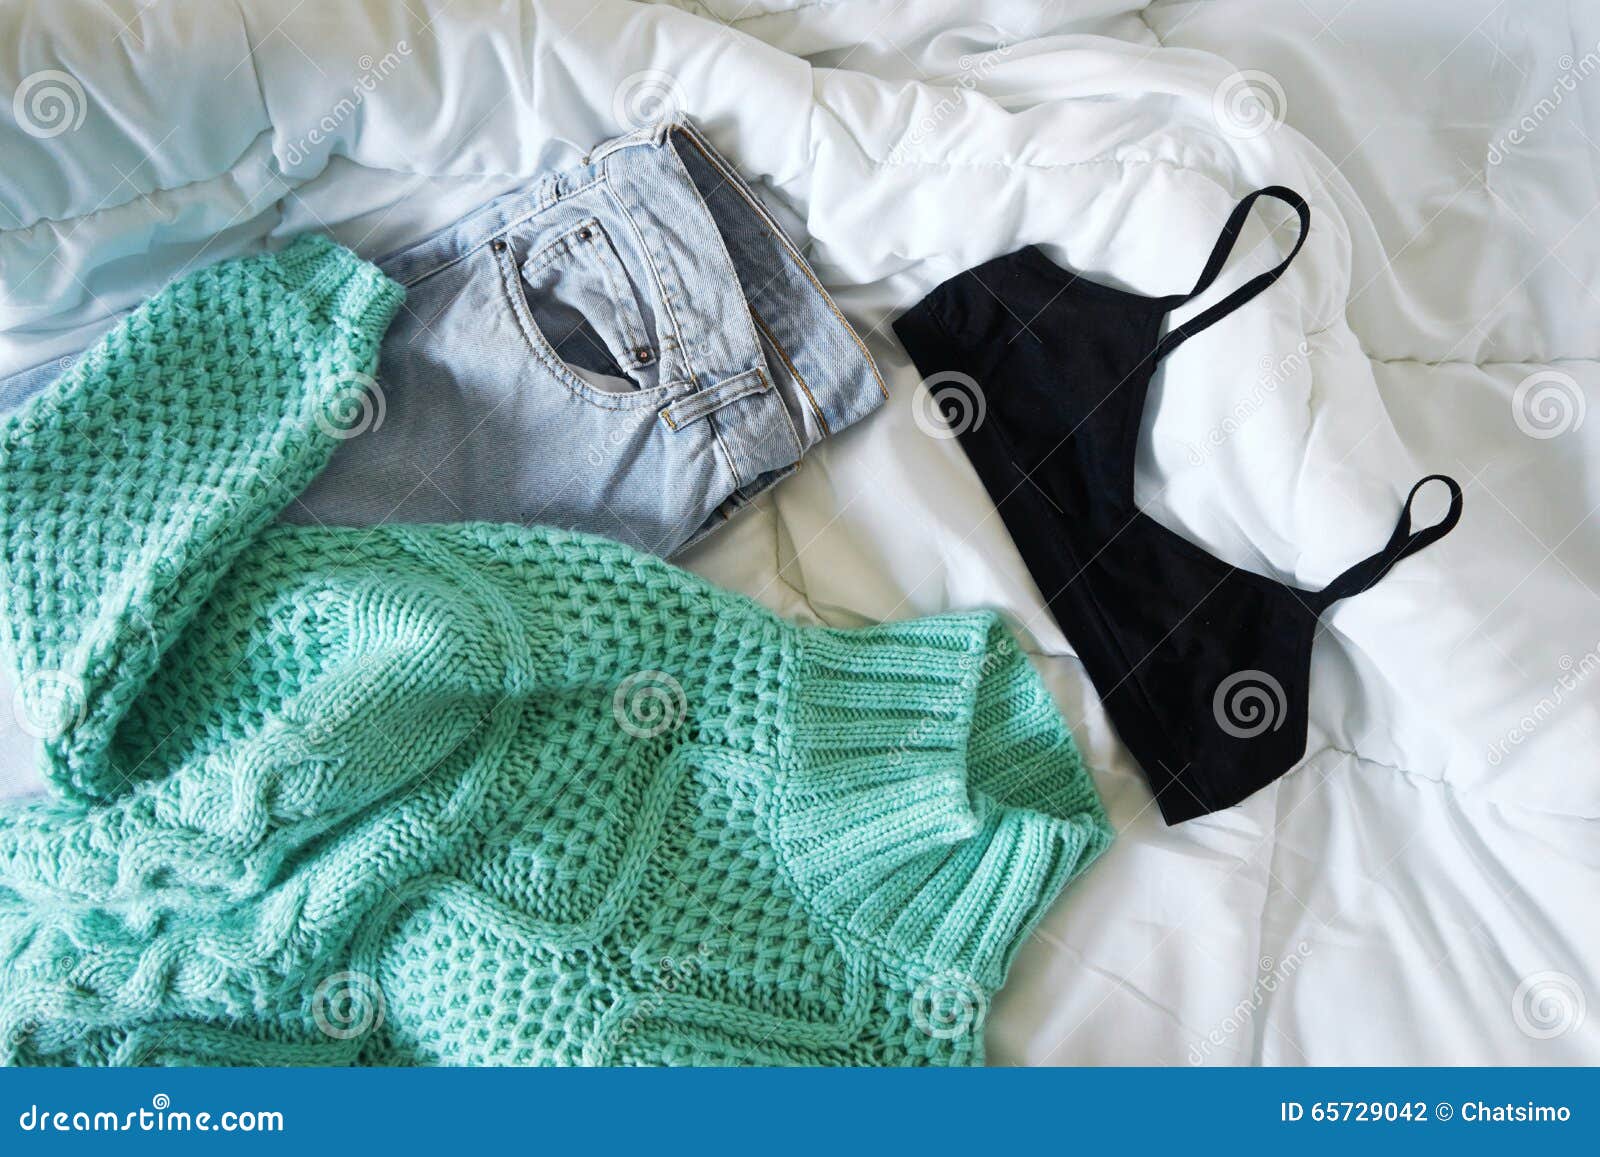 Female Outfit Laid Out on Bed Stock Photo - Image of concept, shirt ...